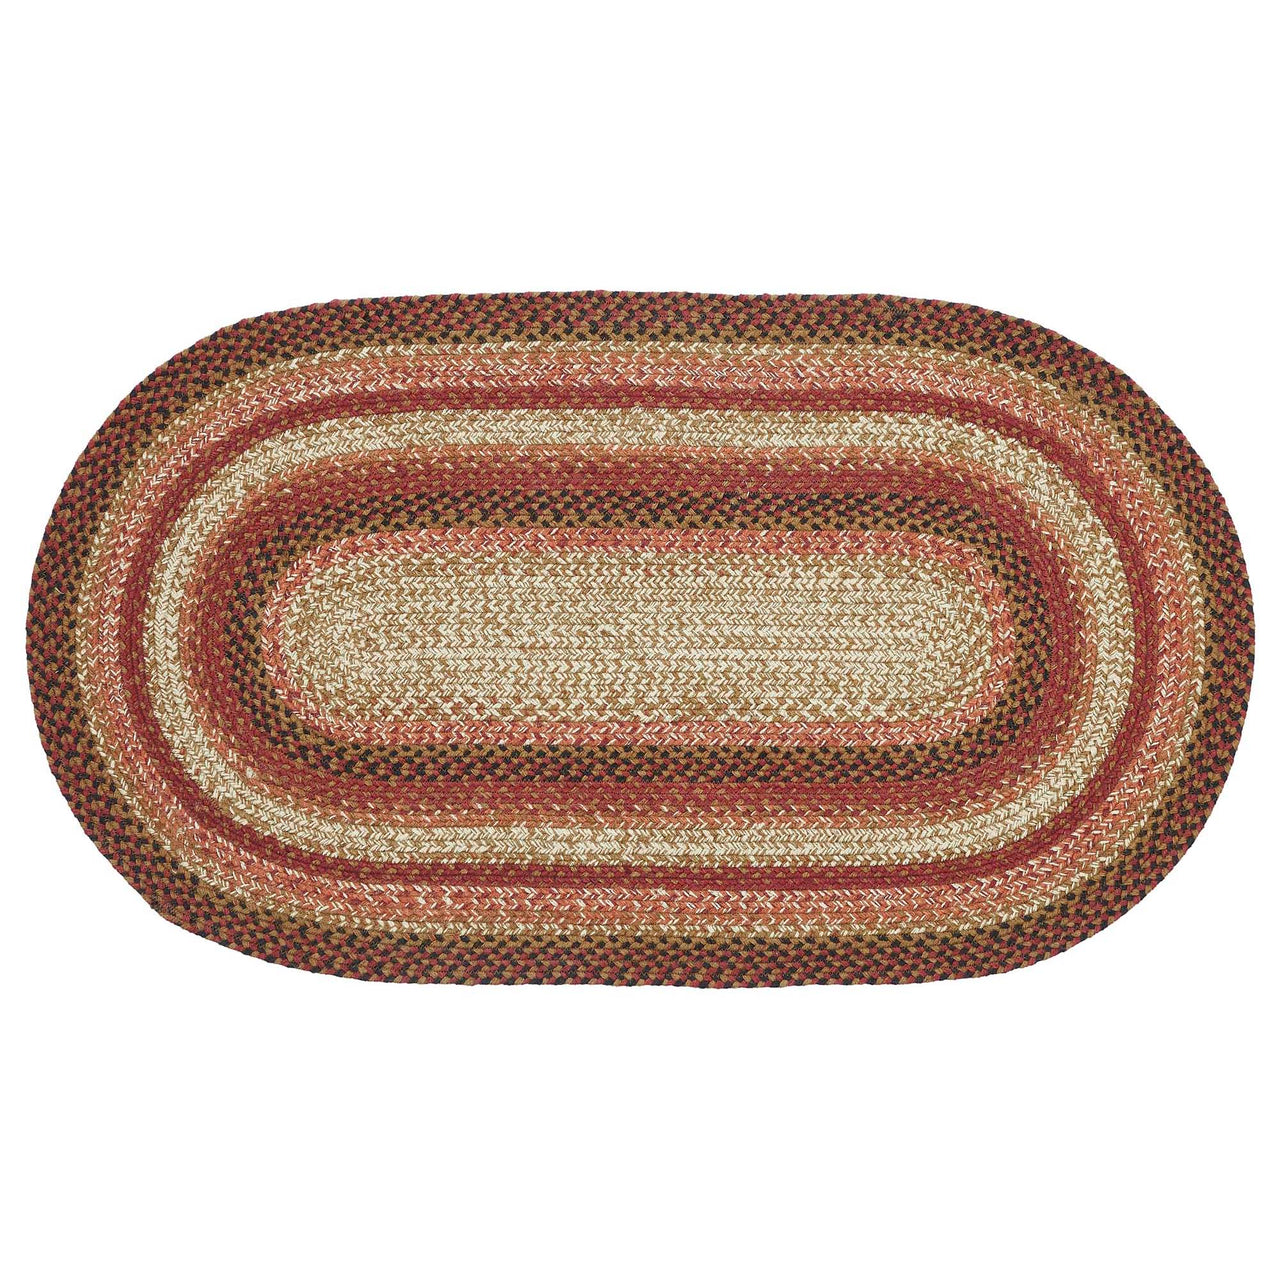 Ginger Spice Jute Braided Rug Oval with Rug Pad 27"x48" VHC Brands